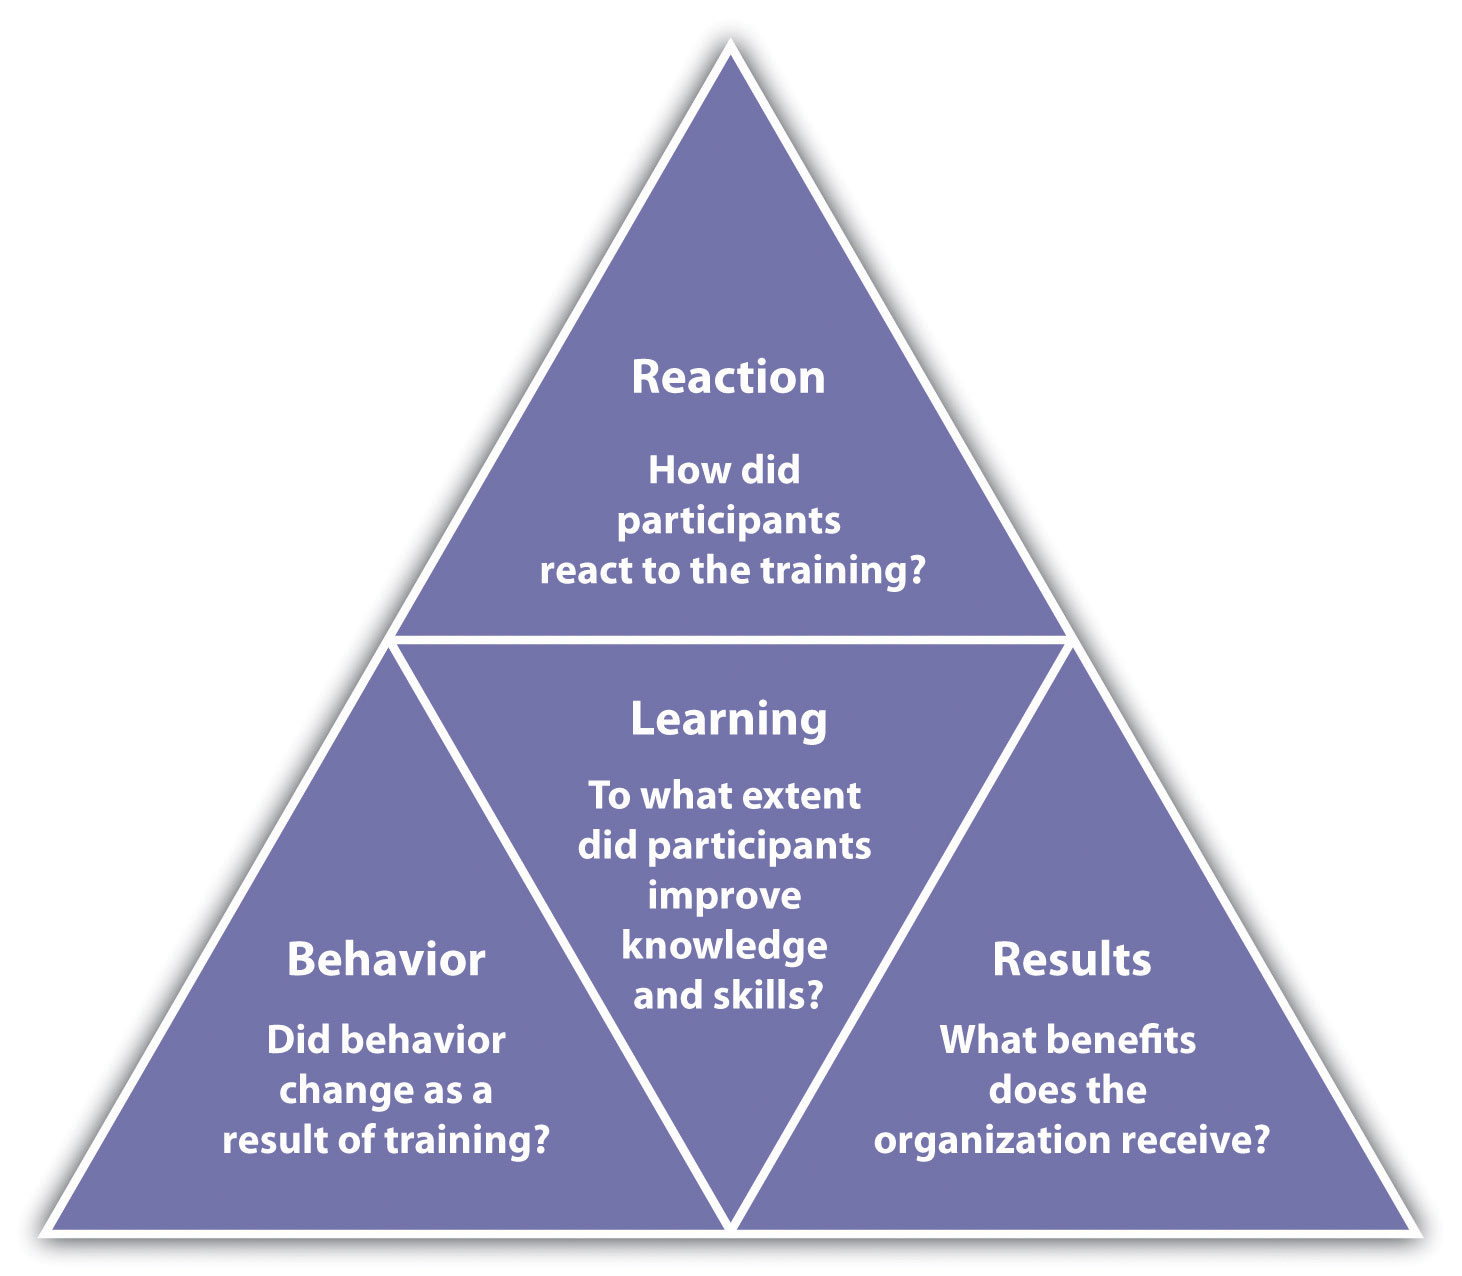 Kirkpatrick's Four Levels of Training Evaluation: Reaction (How did participants react to the training?); Learning (To what extent did participants improve knowledge and skills?); Behavior (Did behavior change as a result of training?); and Results (What benefits does the organization receive?).